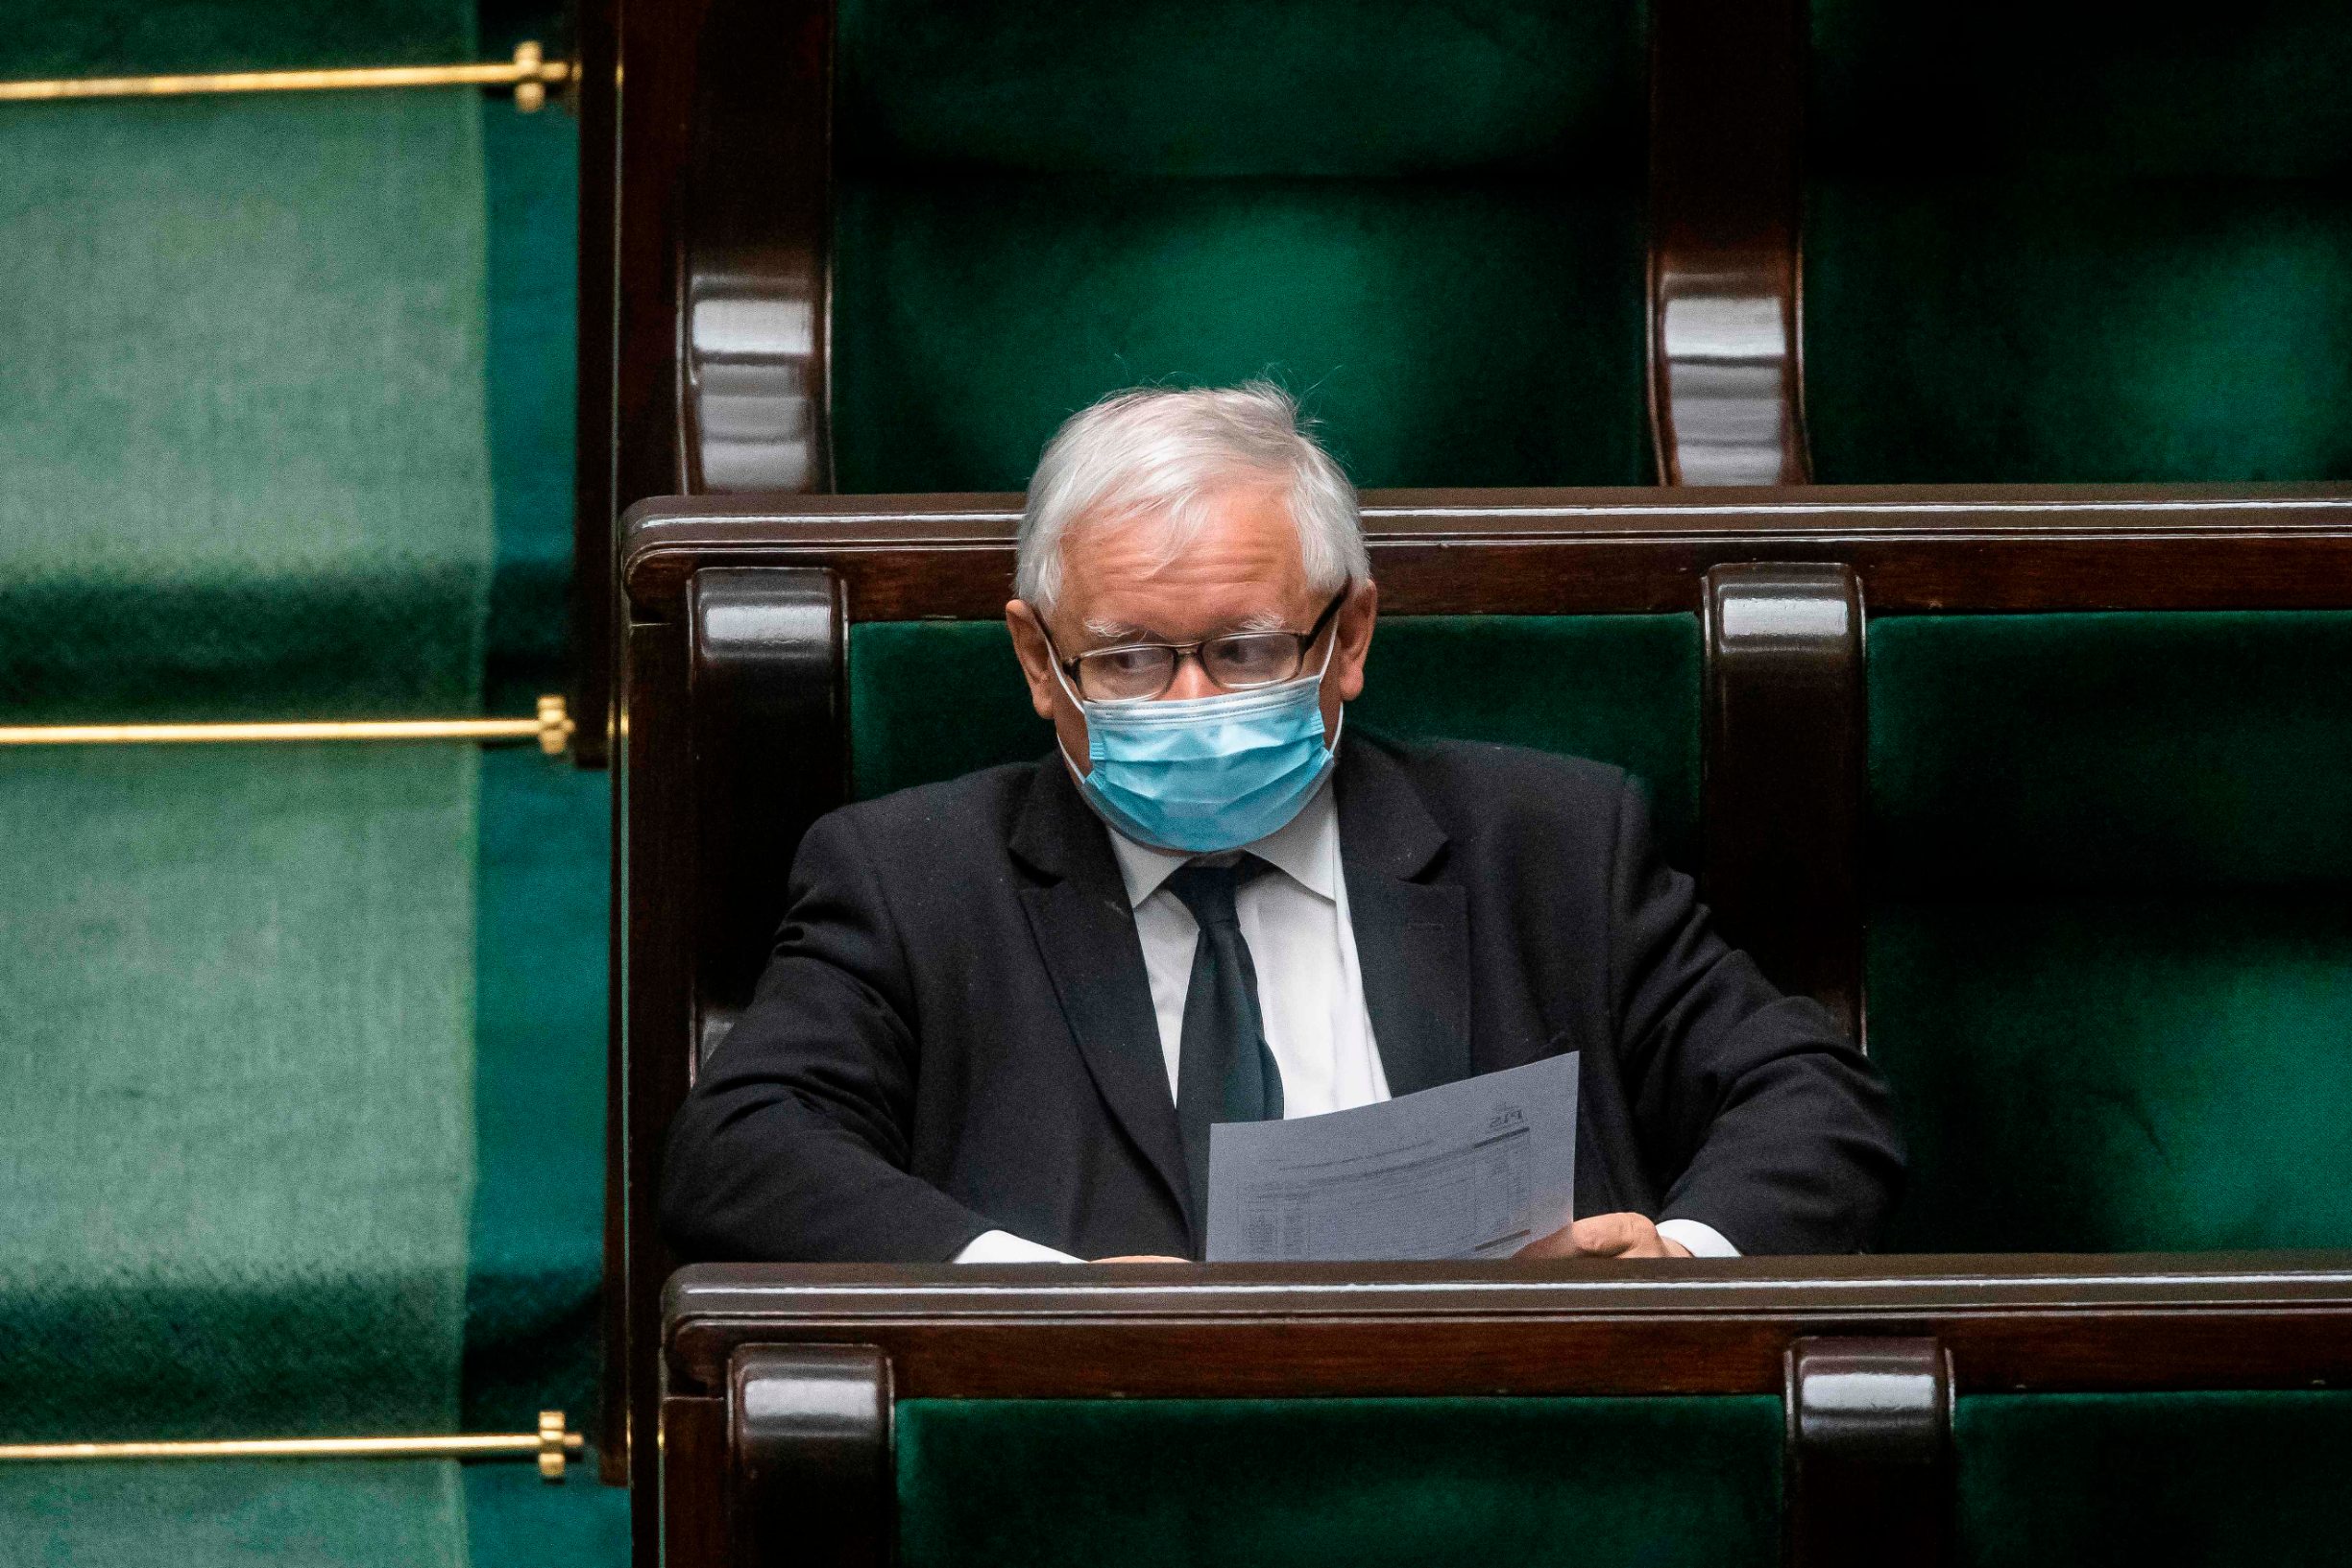 Leader of ruling Law and Justice (PiS) party Jaroslaw Kaczynski attends a session of the lower house of parliament, in Warsaw, May 6, 2020. (Photo by Wojtek RADWANSKI / AFP)